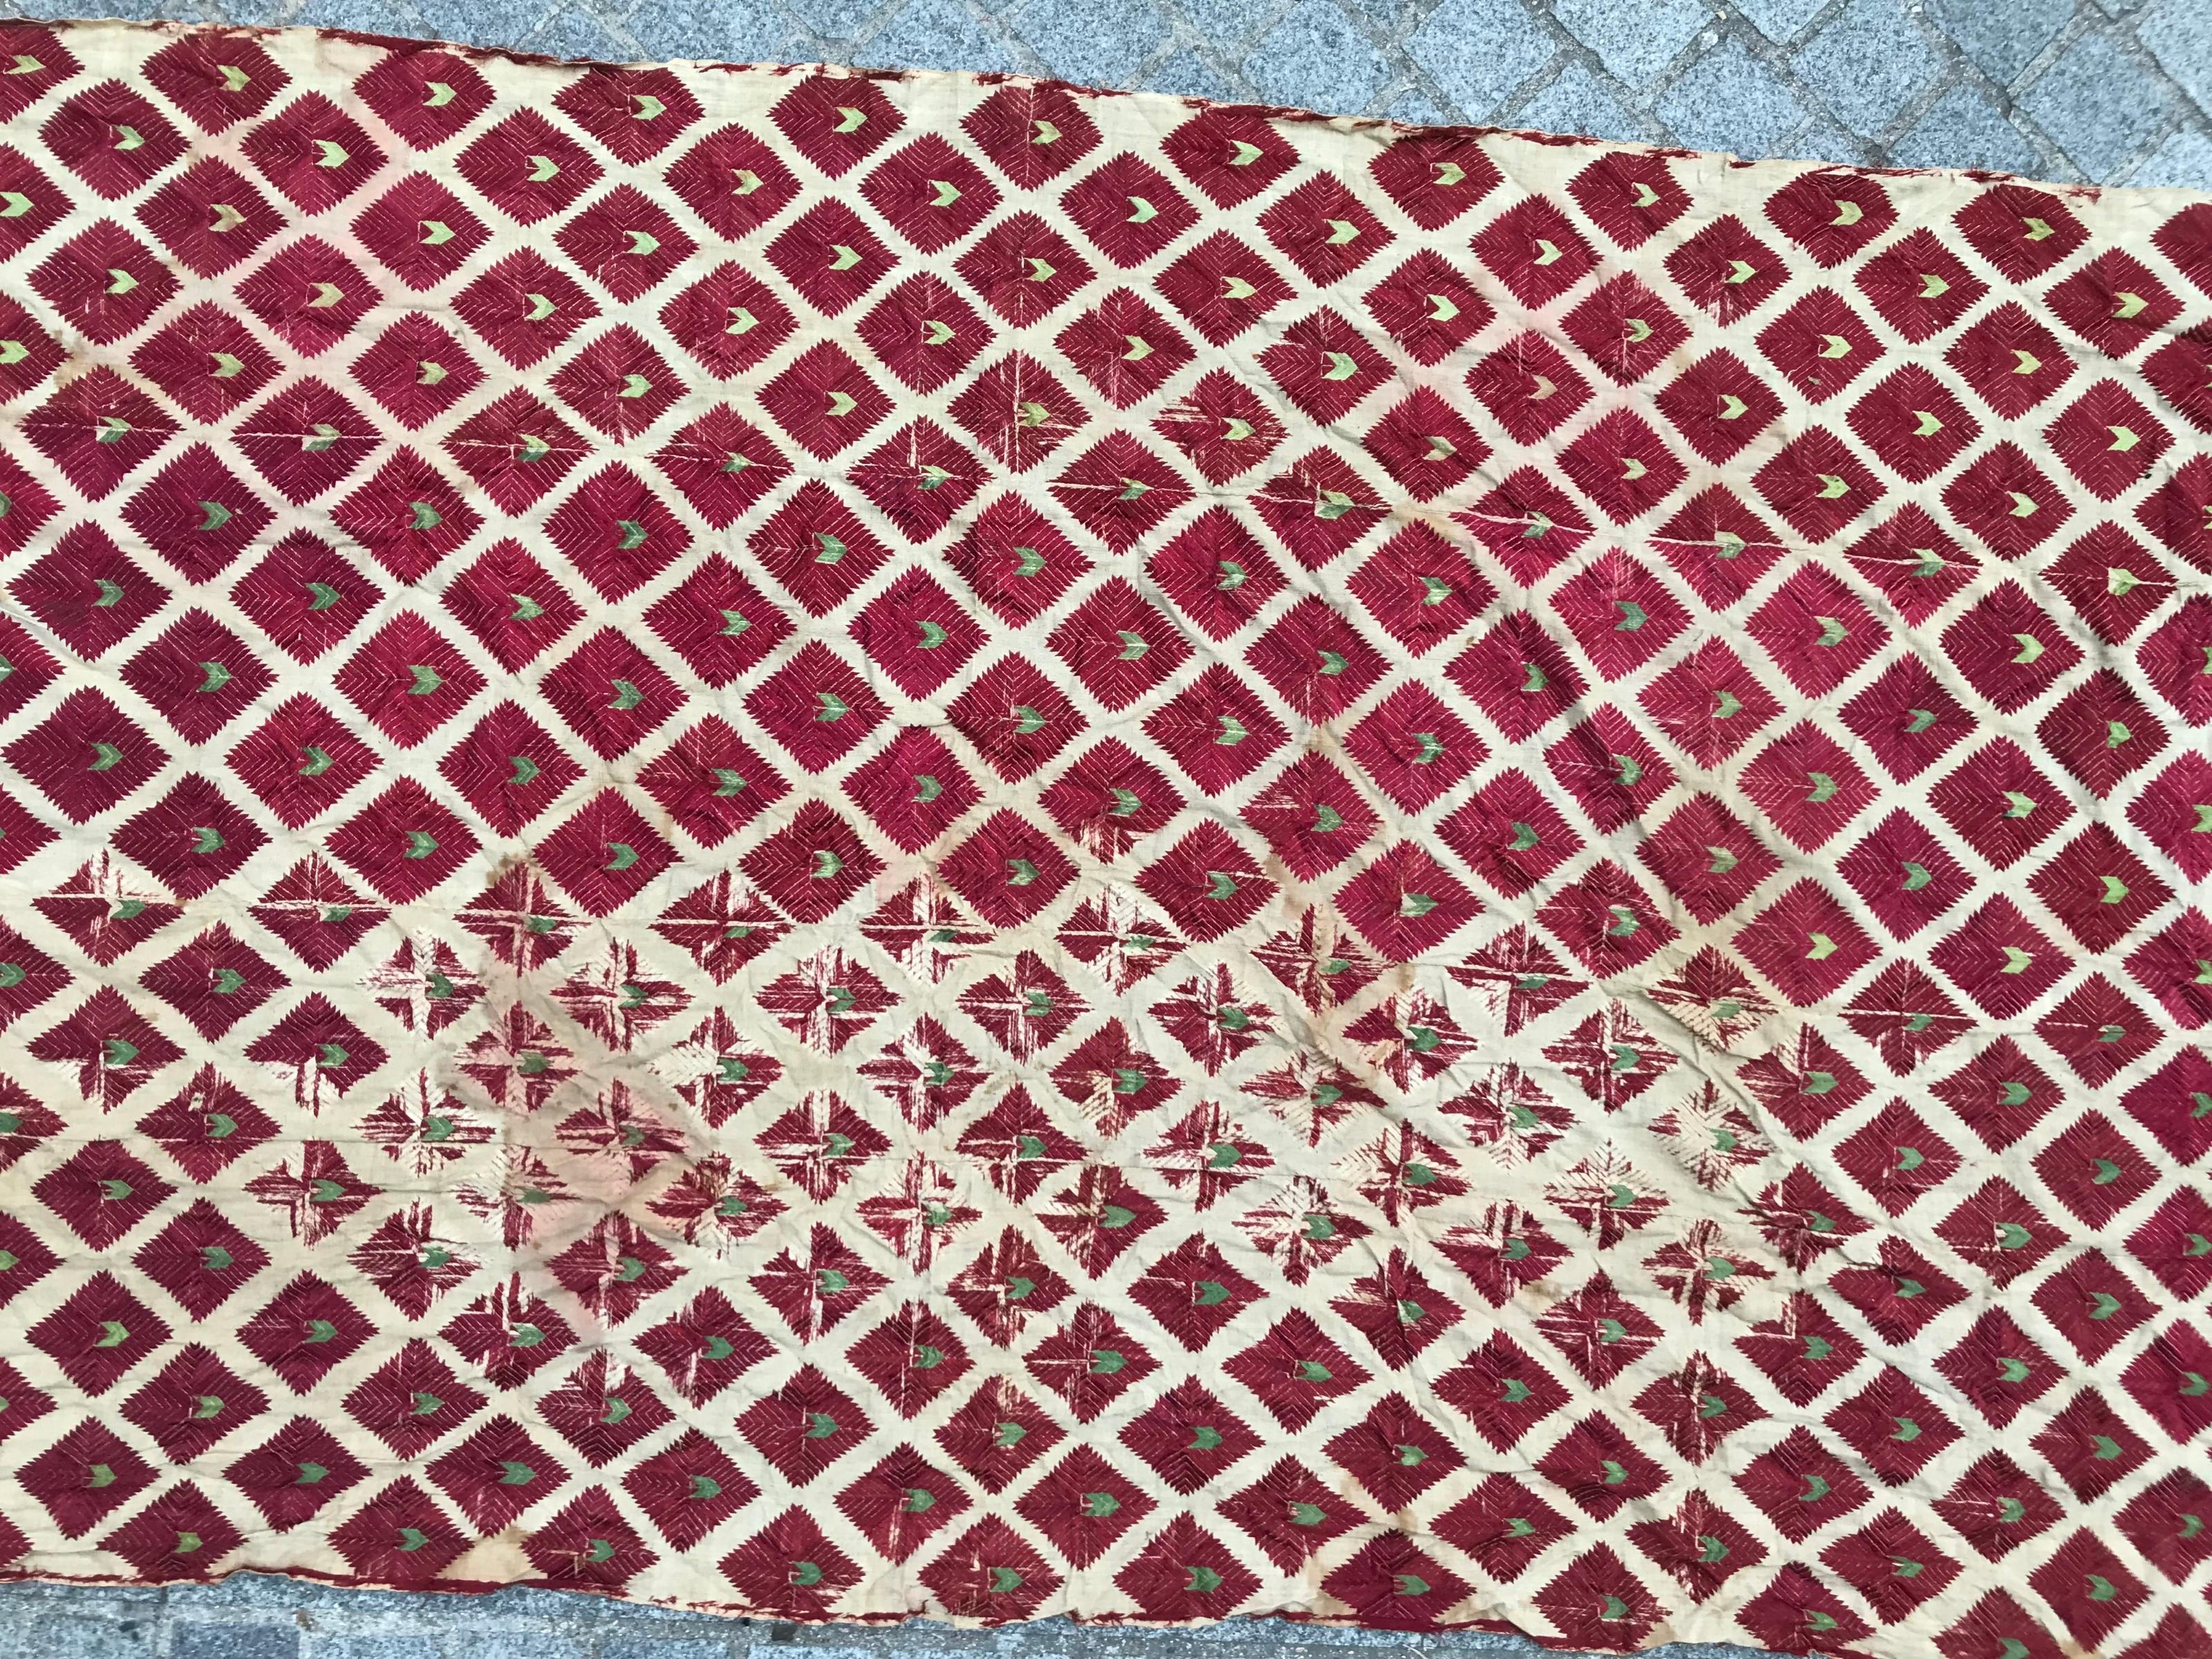 Nice antique embroidery Pulkari from India, usually used as bed cover for marriages, embroidered with silk on cotton, early 20th century.